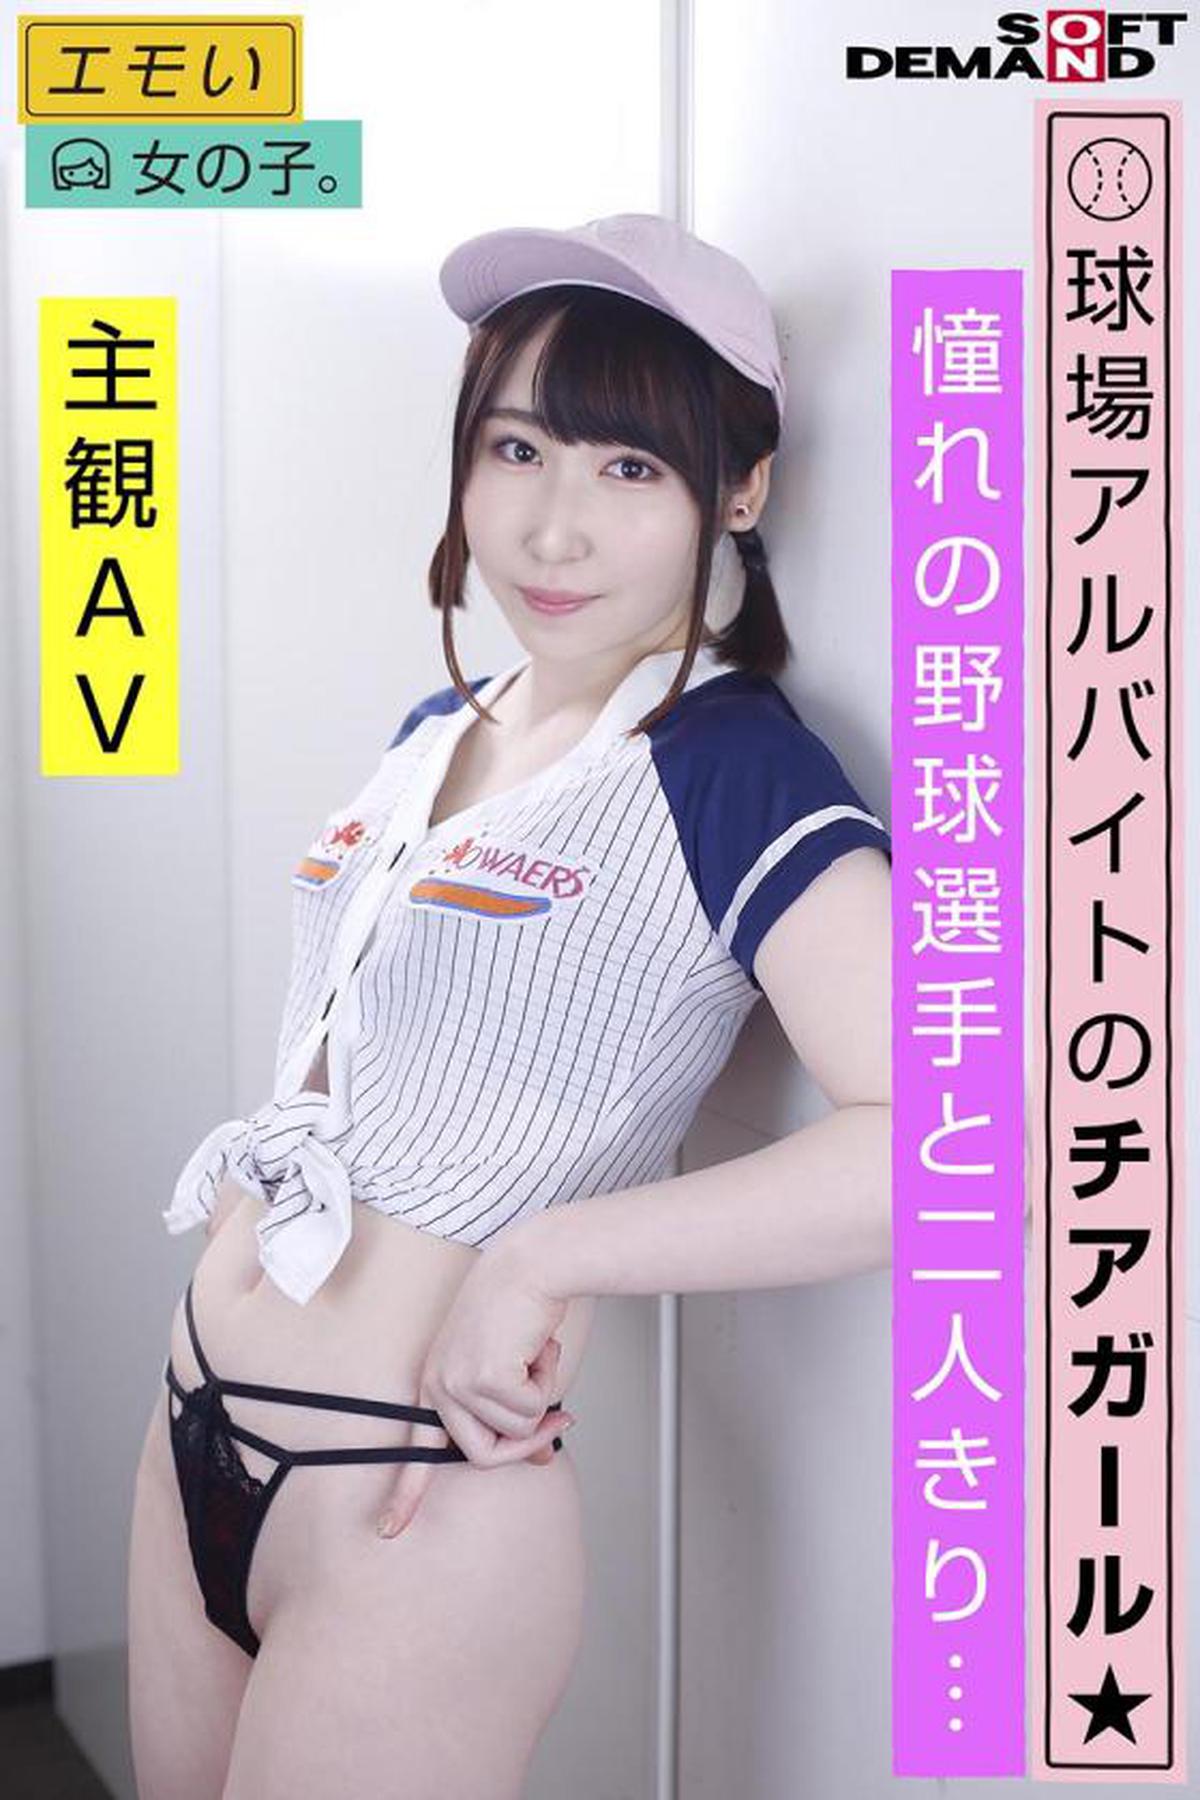 107EMOI-040 Cheer Girl at the Baseball Stadium / Playing with Fire in the Locker Room ♪ Creampie / Alone with a longing baseball player ... / Subjective AV / Tall 168cm / Mugi Honjo (20)